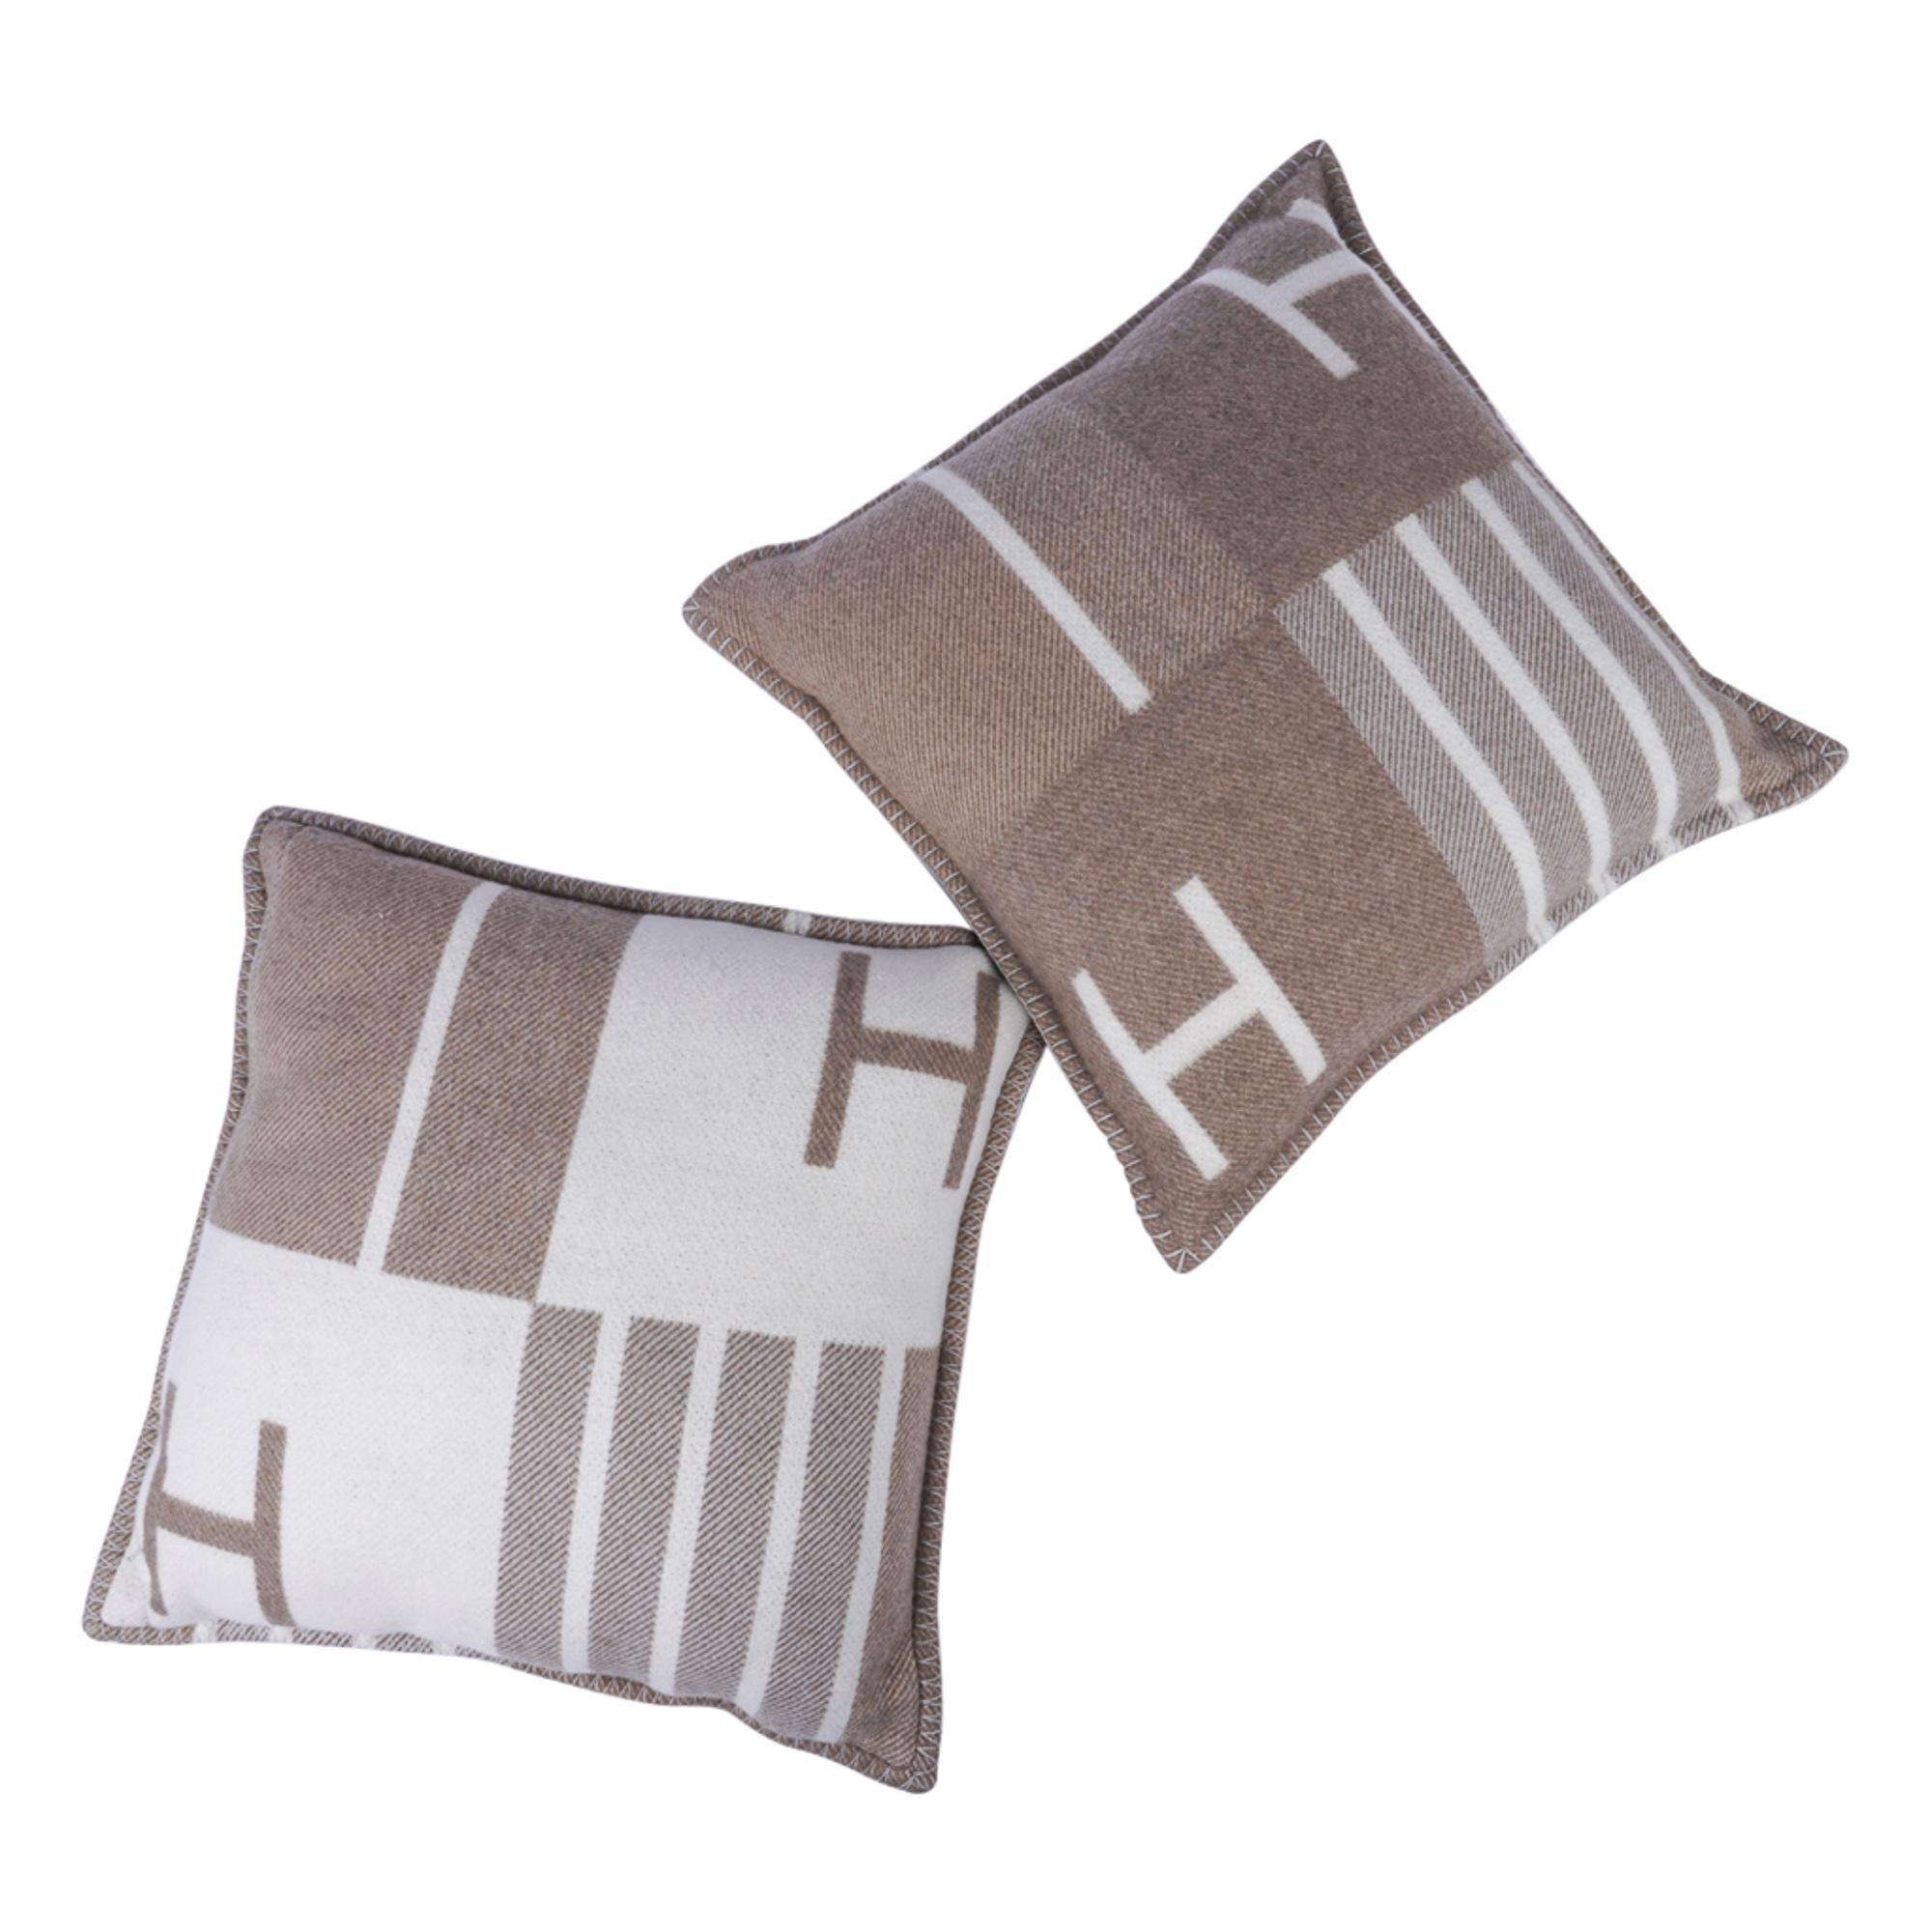 Mightychic offers a set of two (2) Hermes small model limited edition Avalon Vibration pillows with the iconic H featured in Taupe and Ecru.
The removable cover is created from 90% Wool and 10% Cashmere and has whip stitch edges.
Comes with